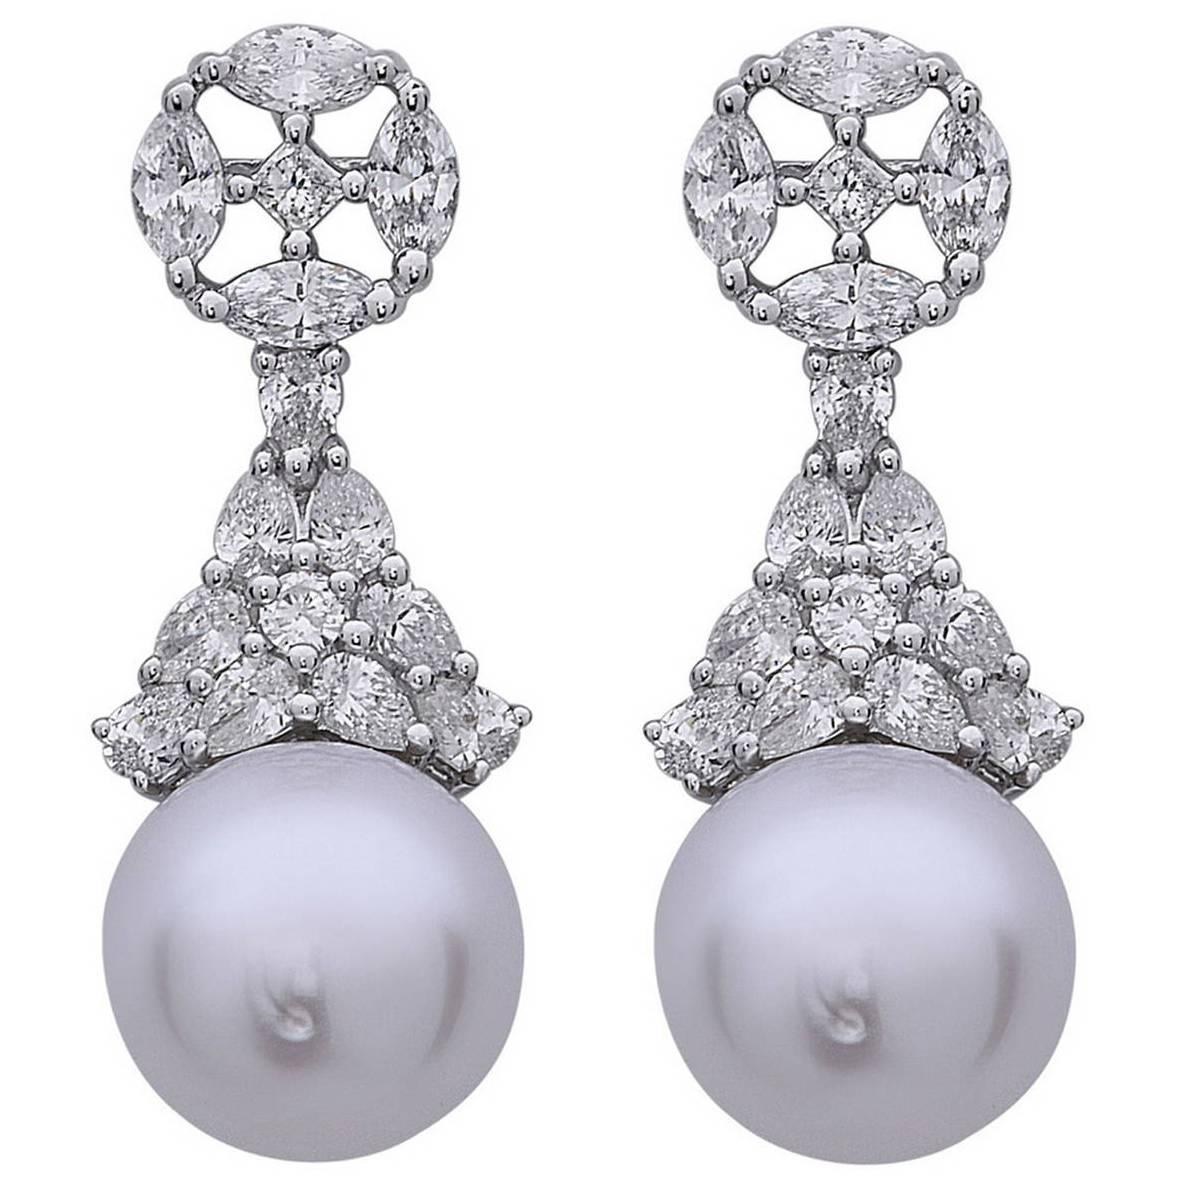 Alluring Diamond Earrings With South Sea Pearl Made In 18k White Gold For Sale